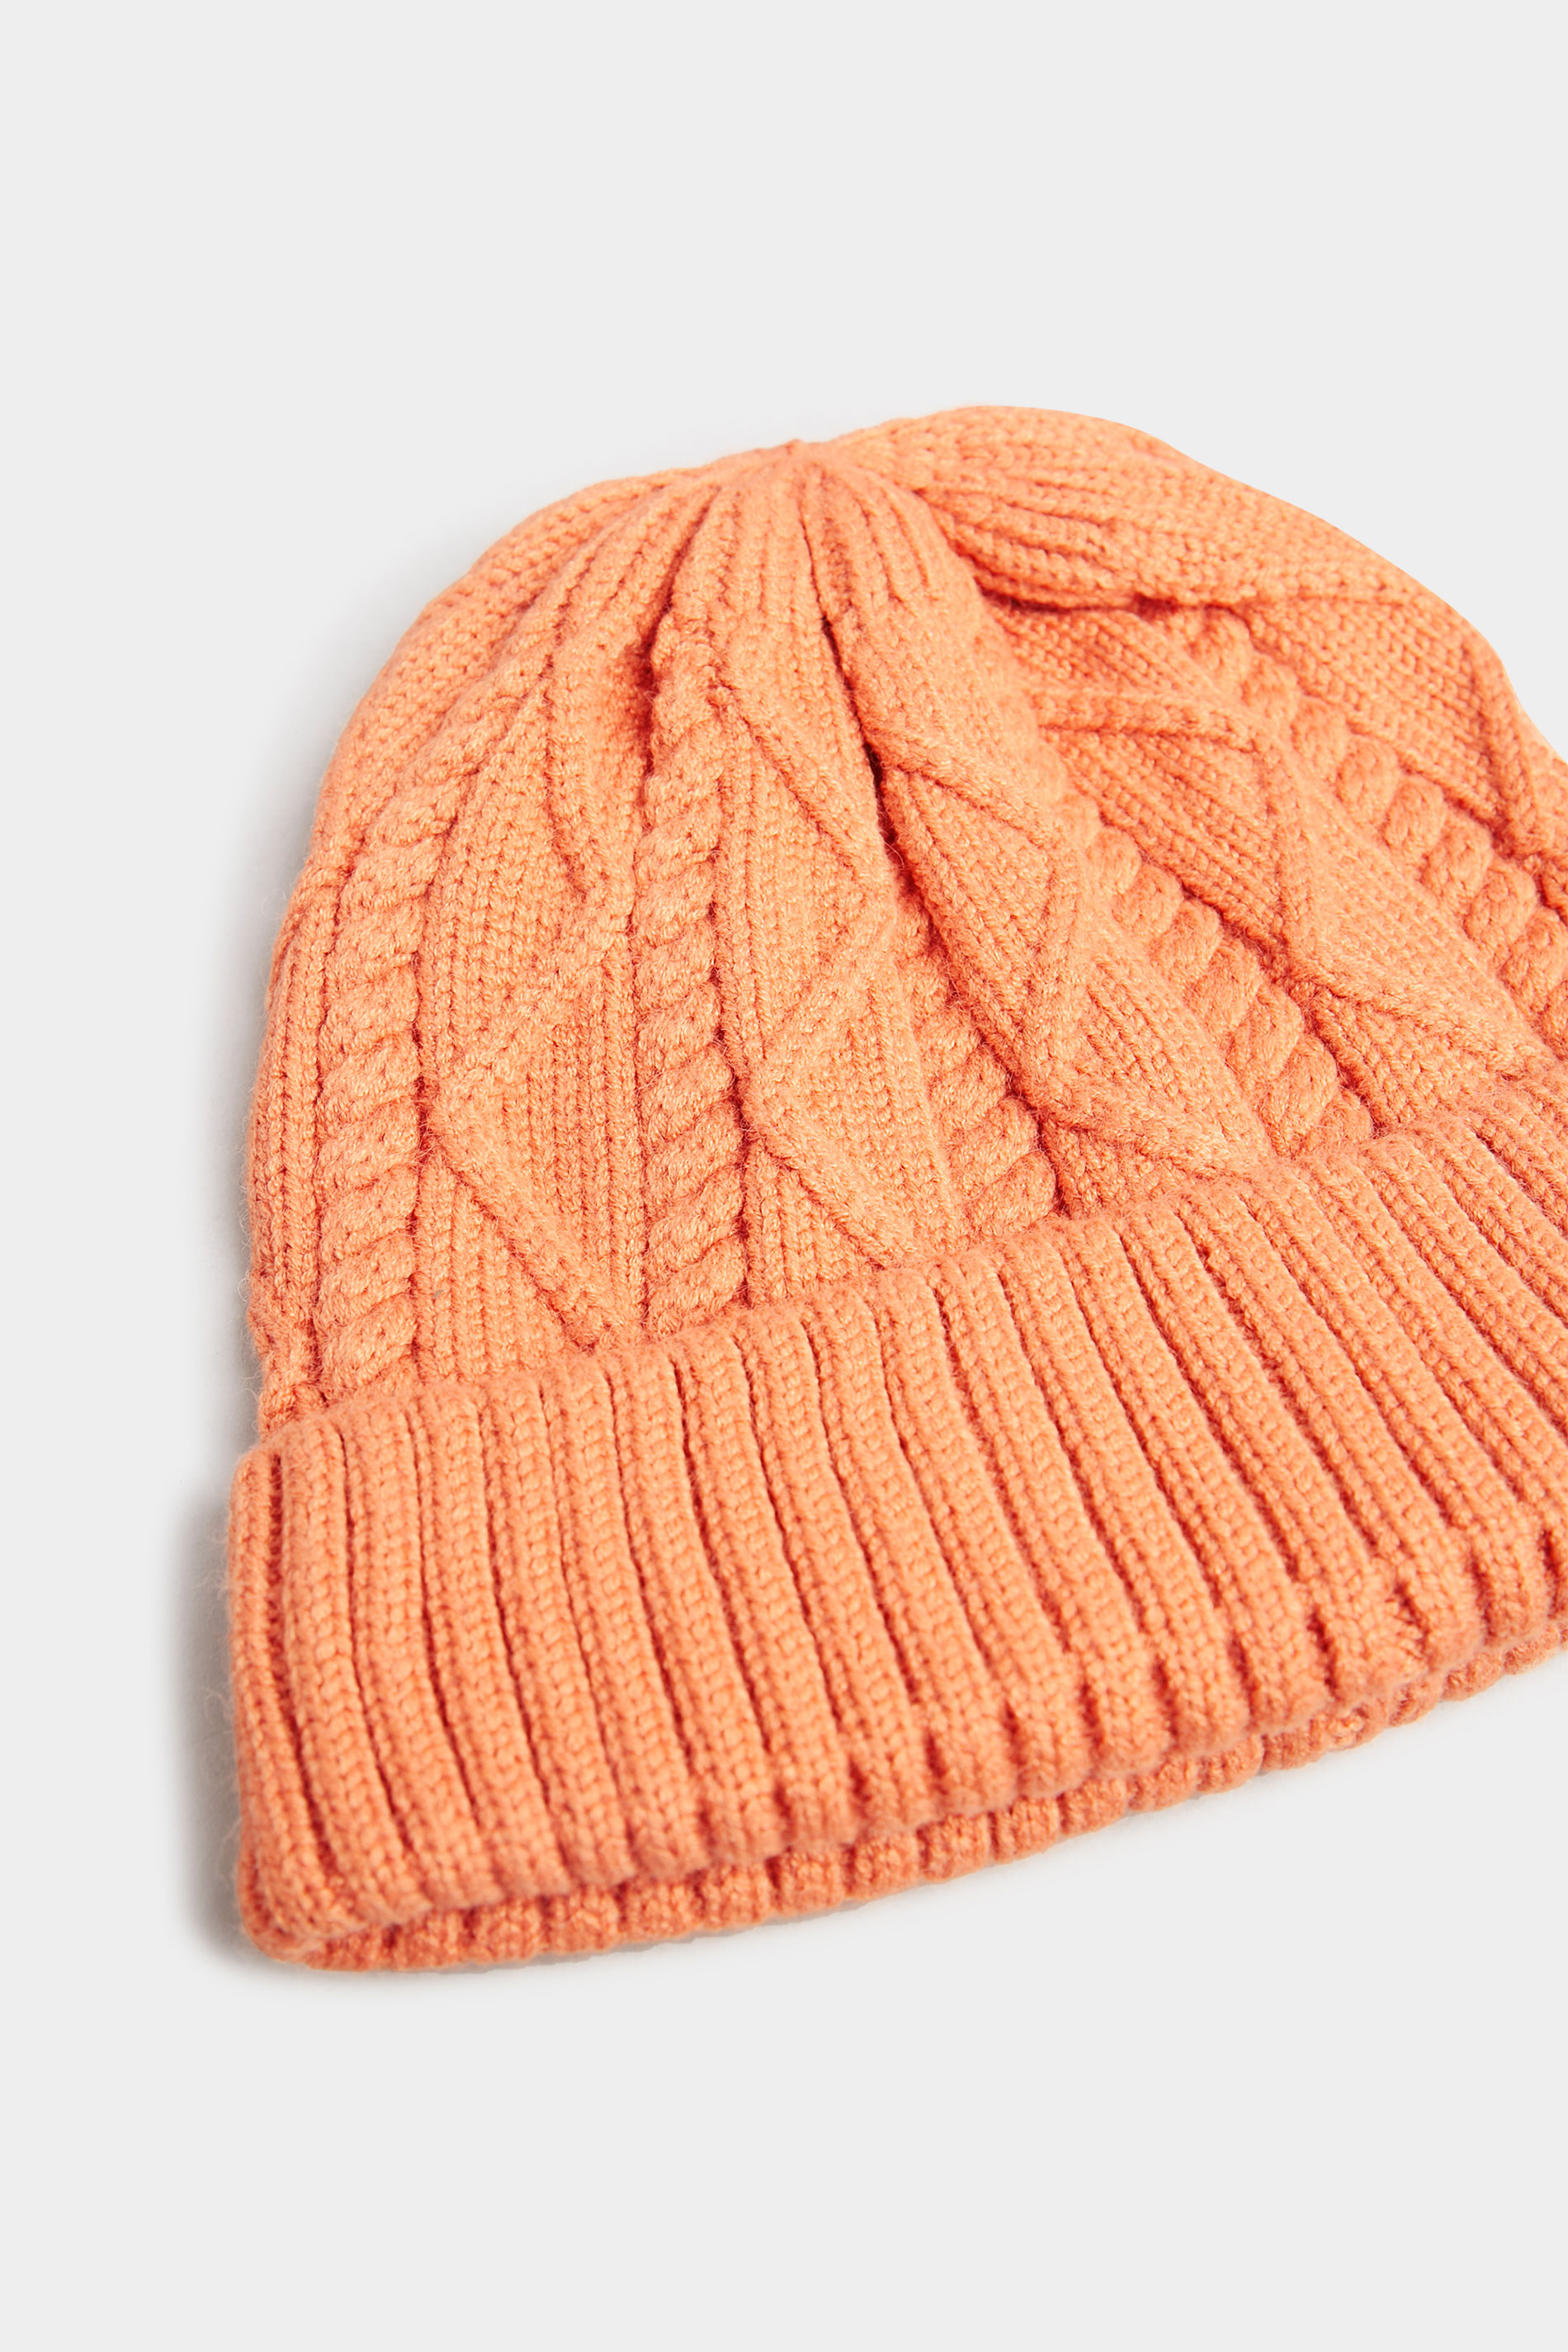 Orange Cable Knitted Beanie Hat | Yours Clothing 2